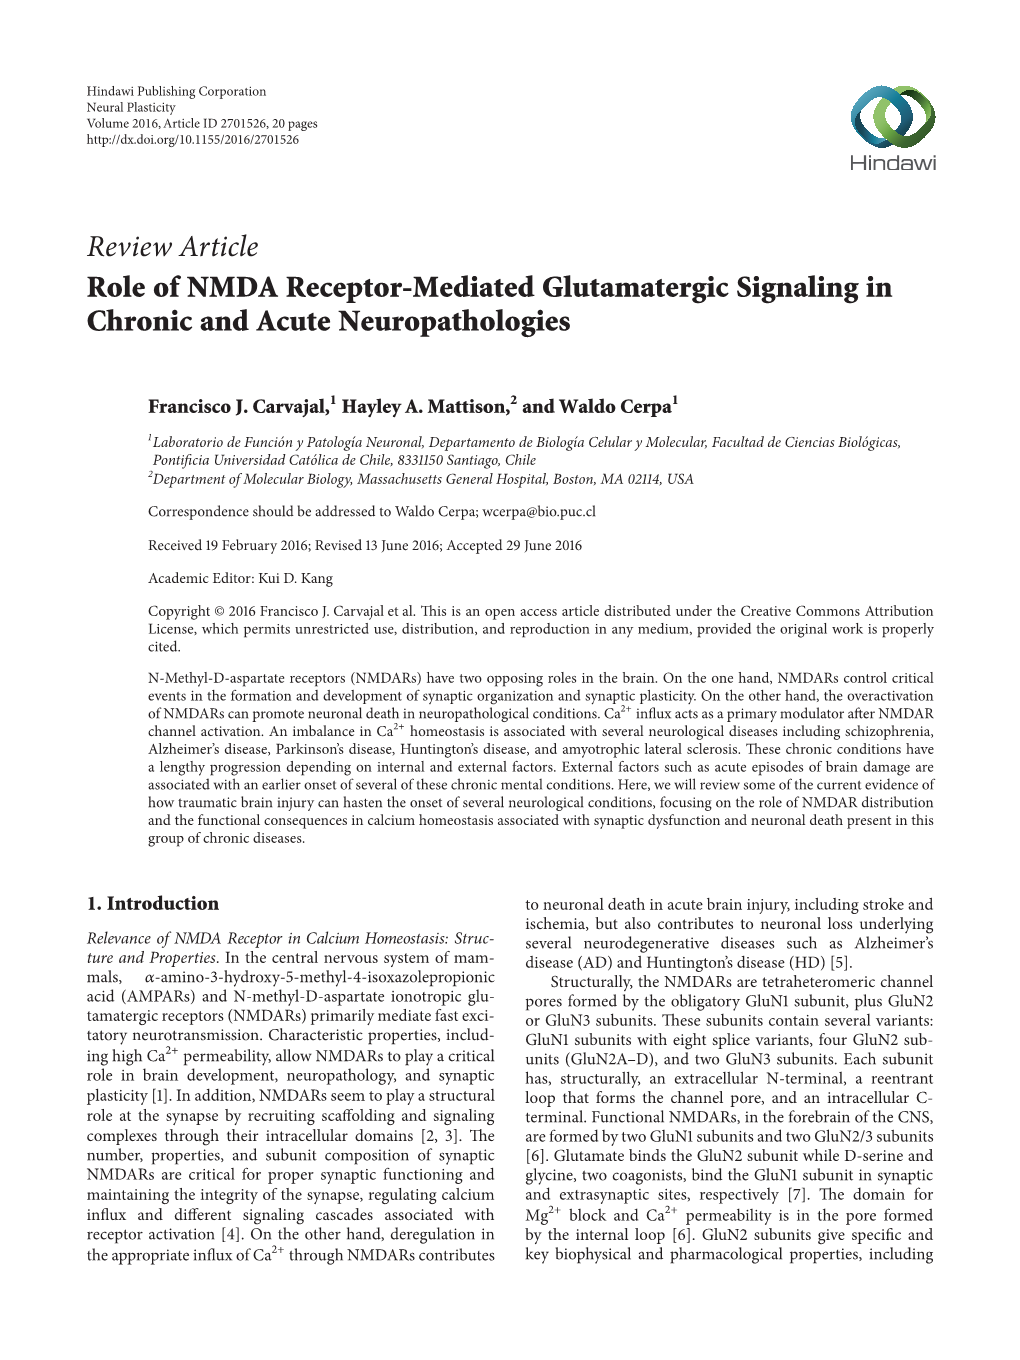 Review Article Role of NMDA Receptor-Mediated Glutamatergic Signaling in Chronic and Acute Neuropathologies